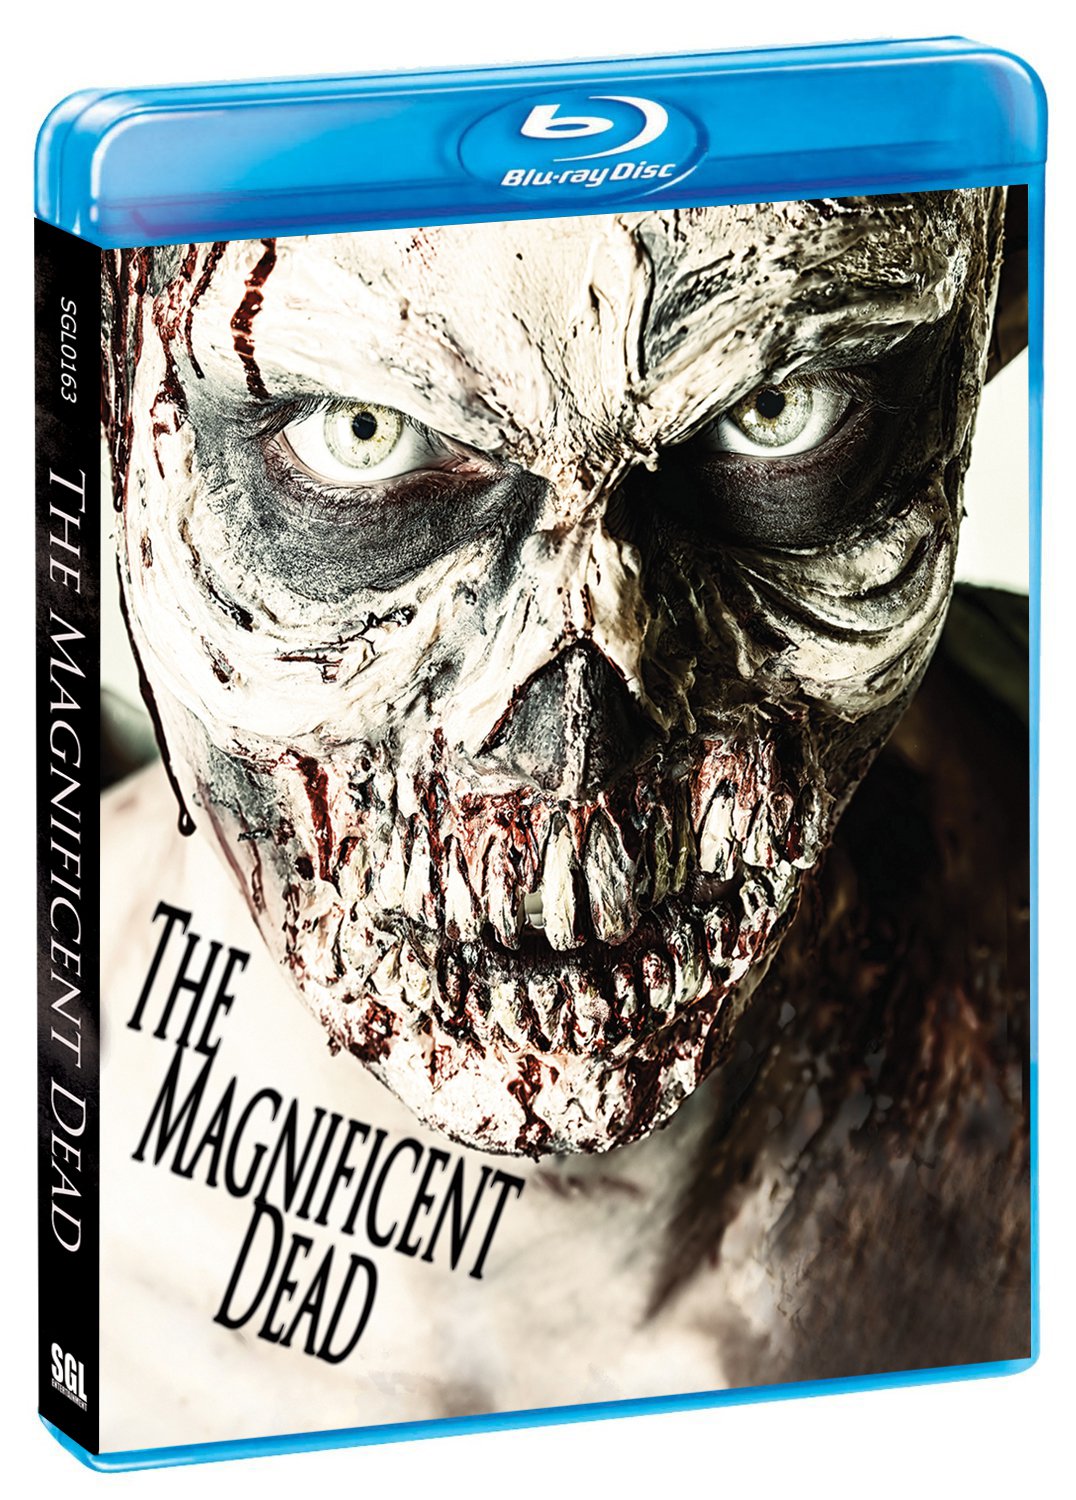 The Magnificent Dead [Blu-ray]